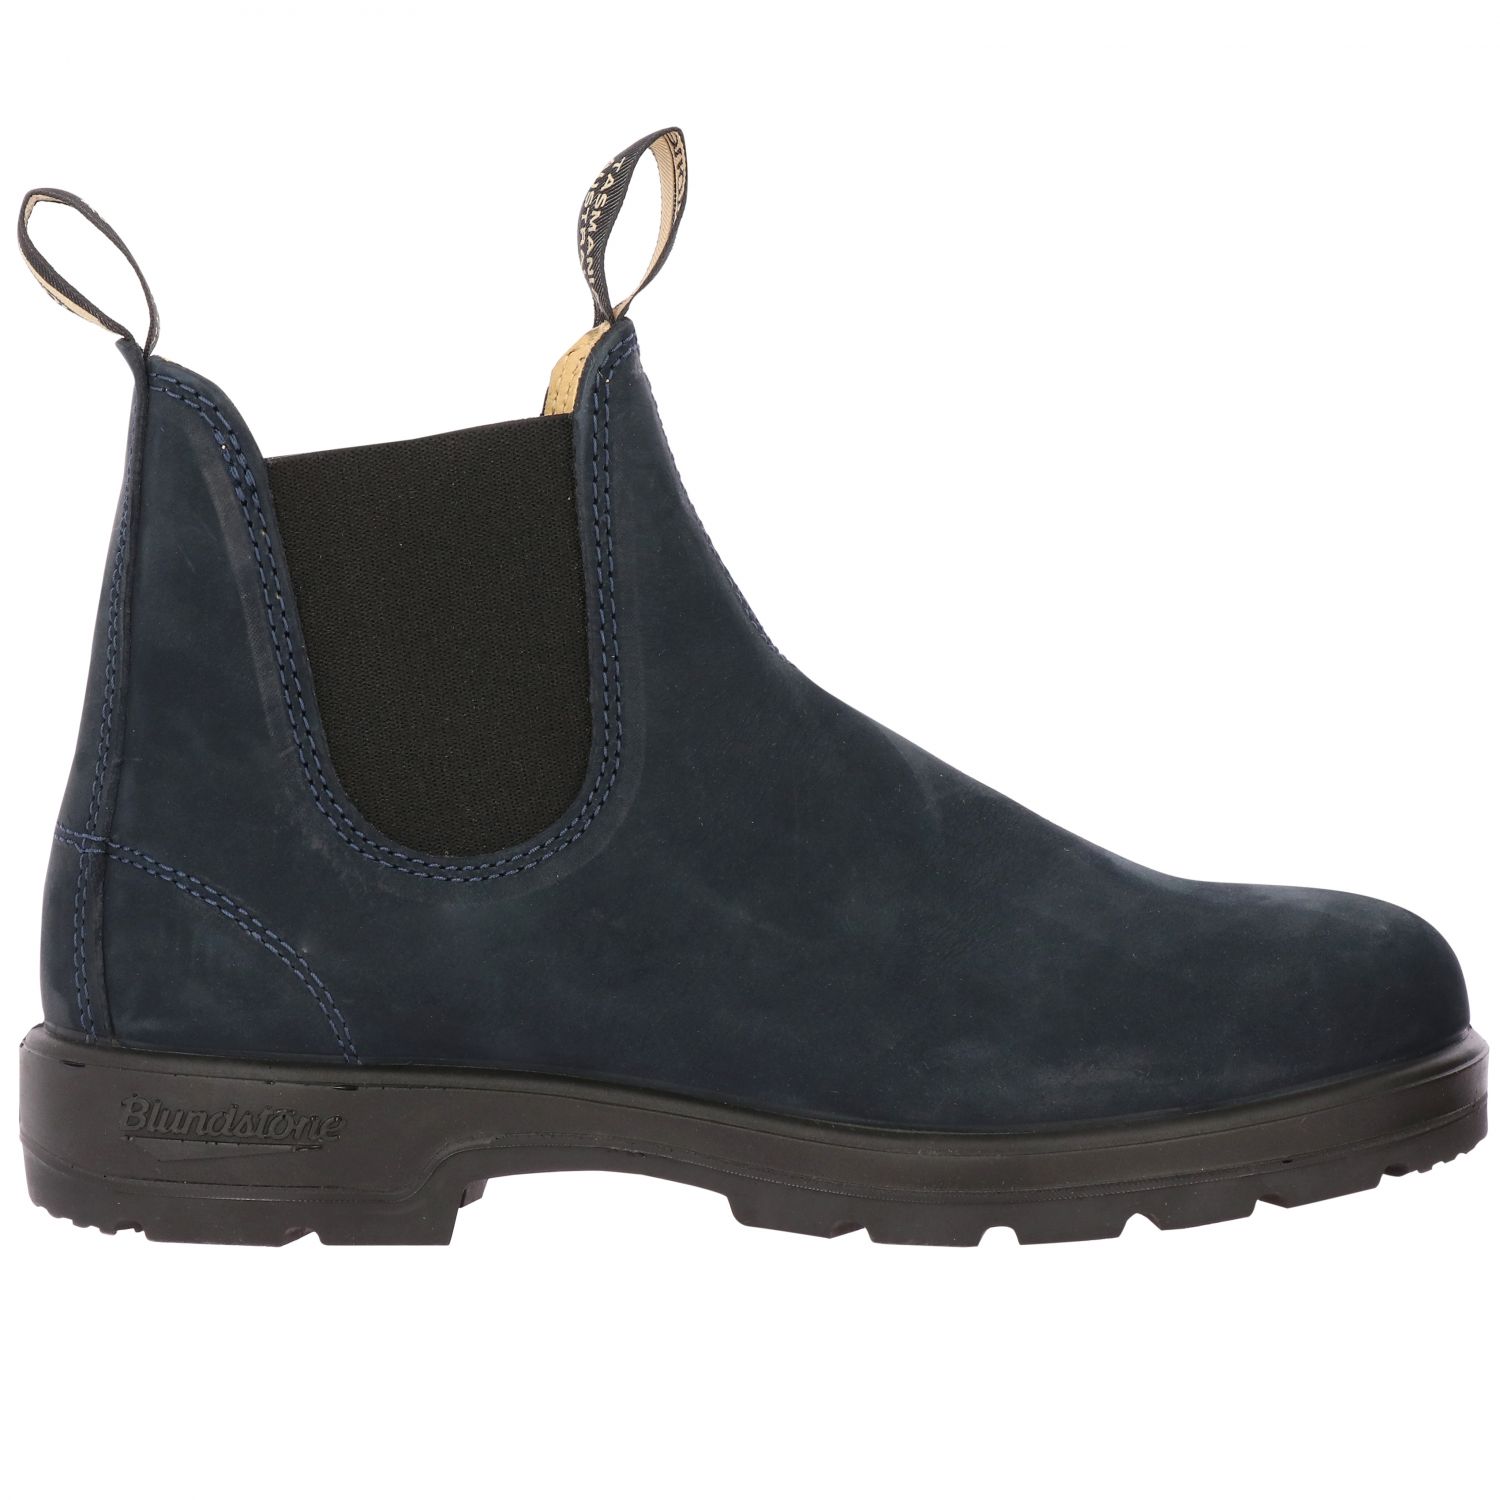 Blundstone Outlet: Boots men | Boots Blundstone Men Navy | Boots ...